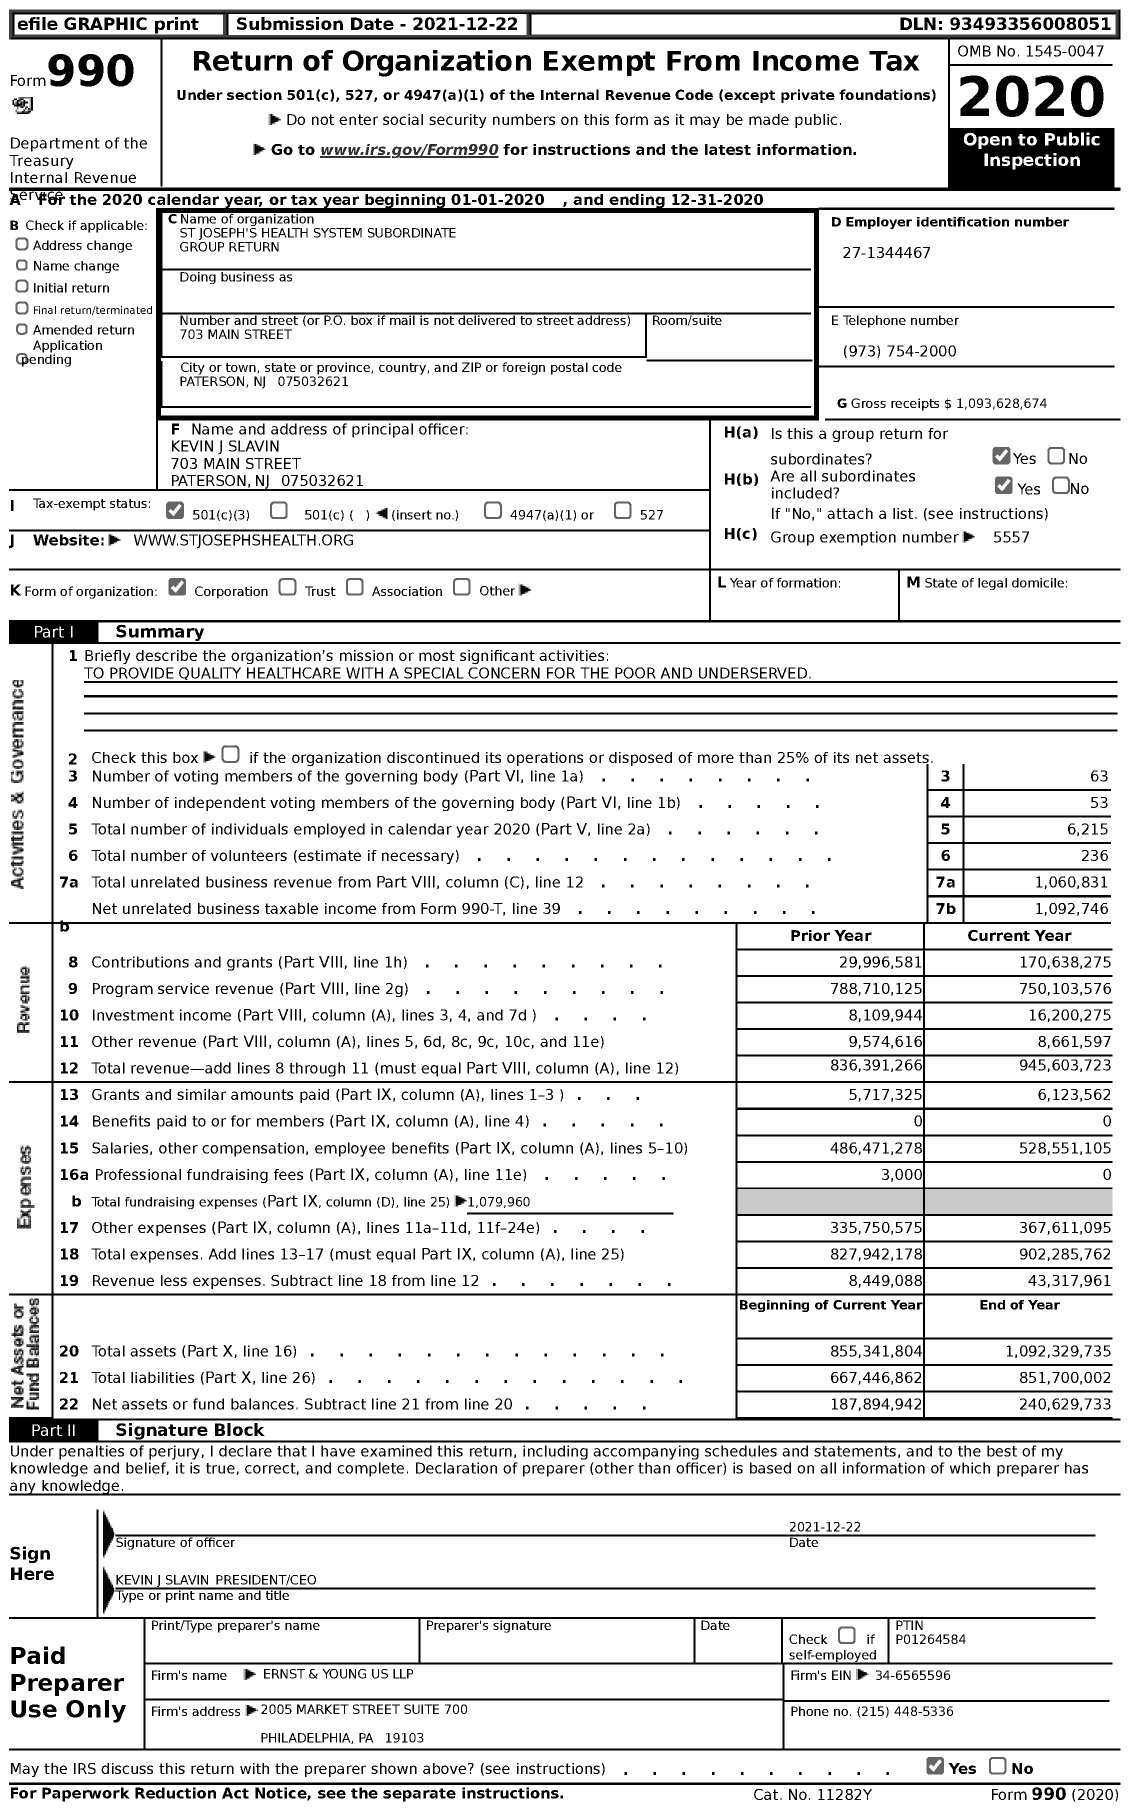 Image of first page of 2020 Form 990 for St Joseph's Health System Subordinate Group Return